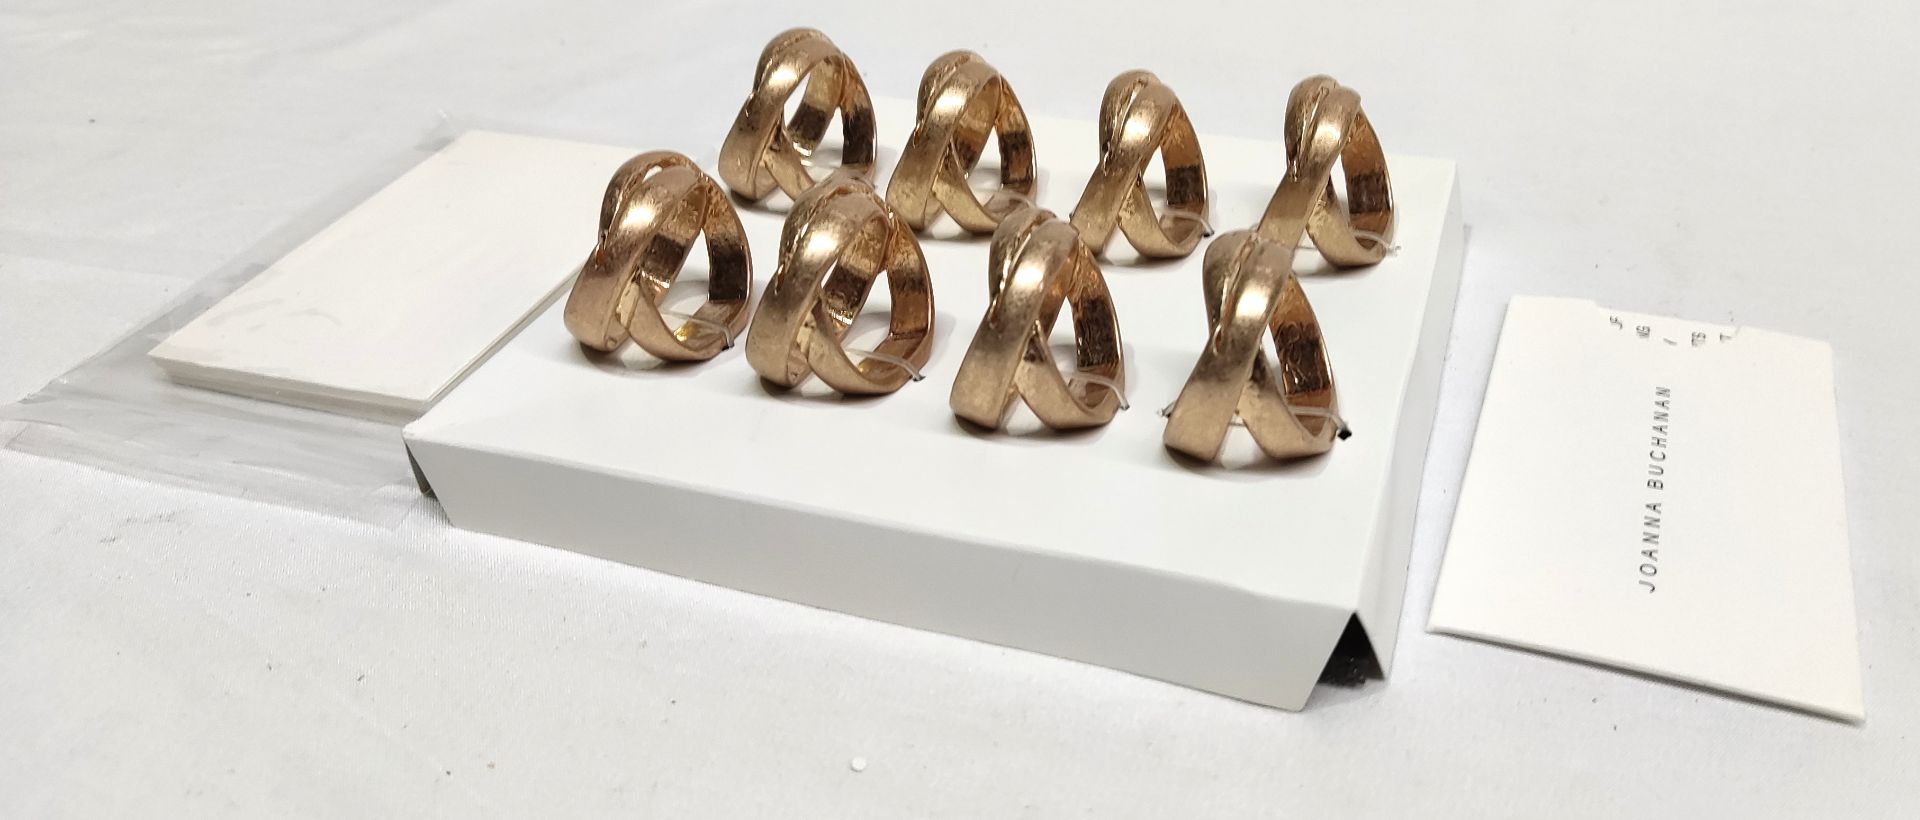 1 x JOANNA BUCHANAN Knot Placecard Holders - Set Of 8 - New/Boxed - Original RRP £168 - Ref: - Image 14 of 19